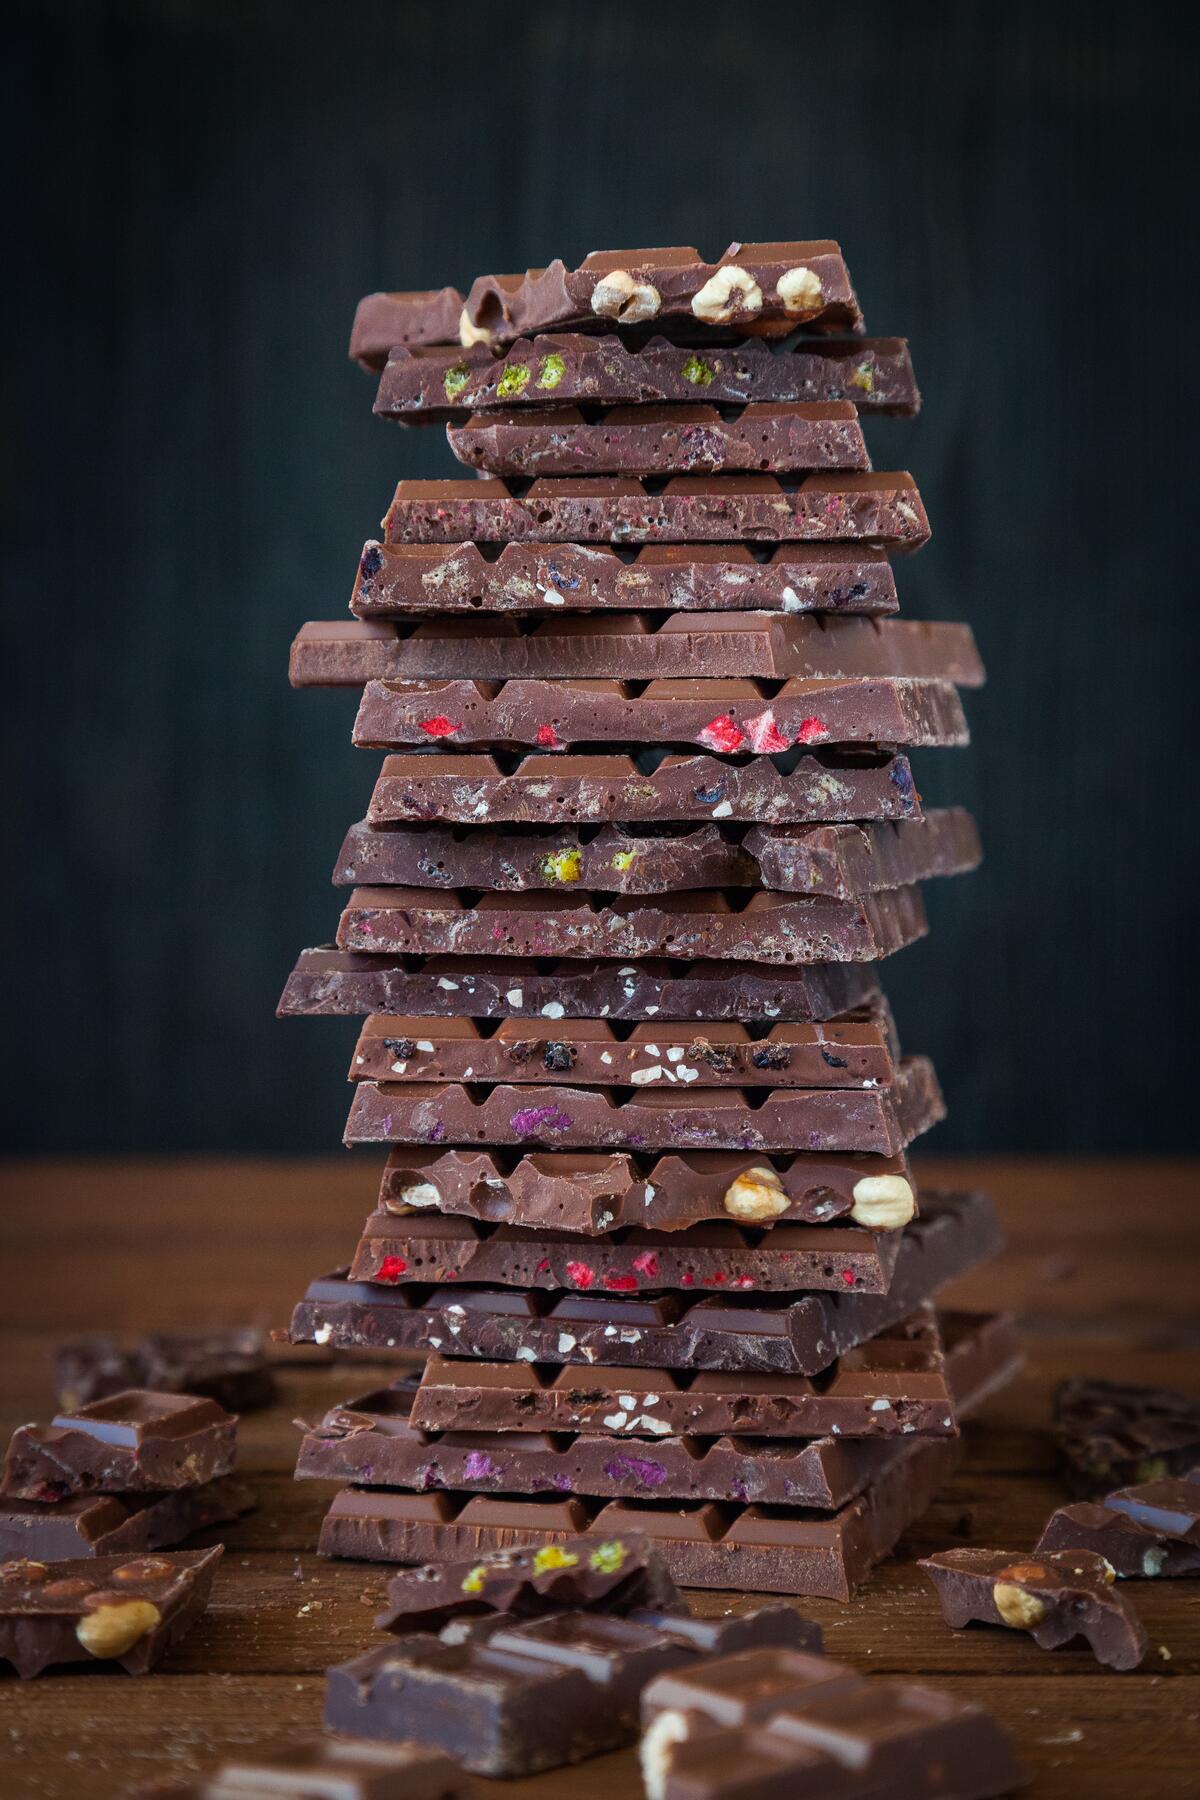 Chocolate tower with different flavors